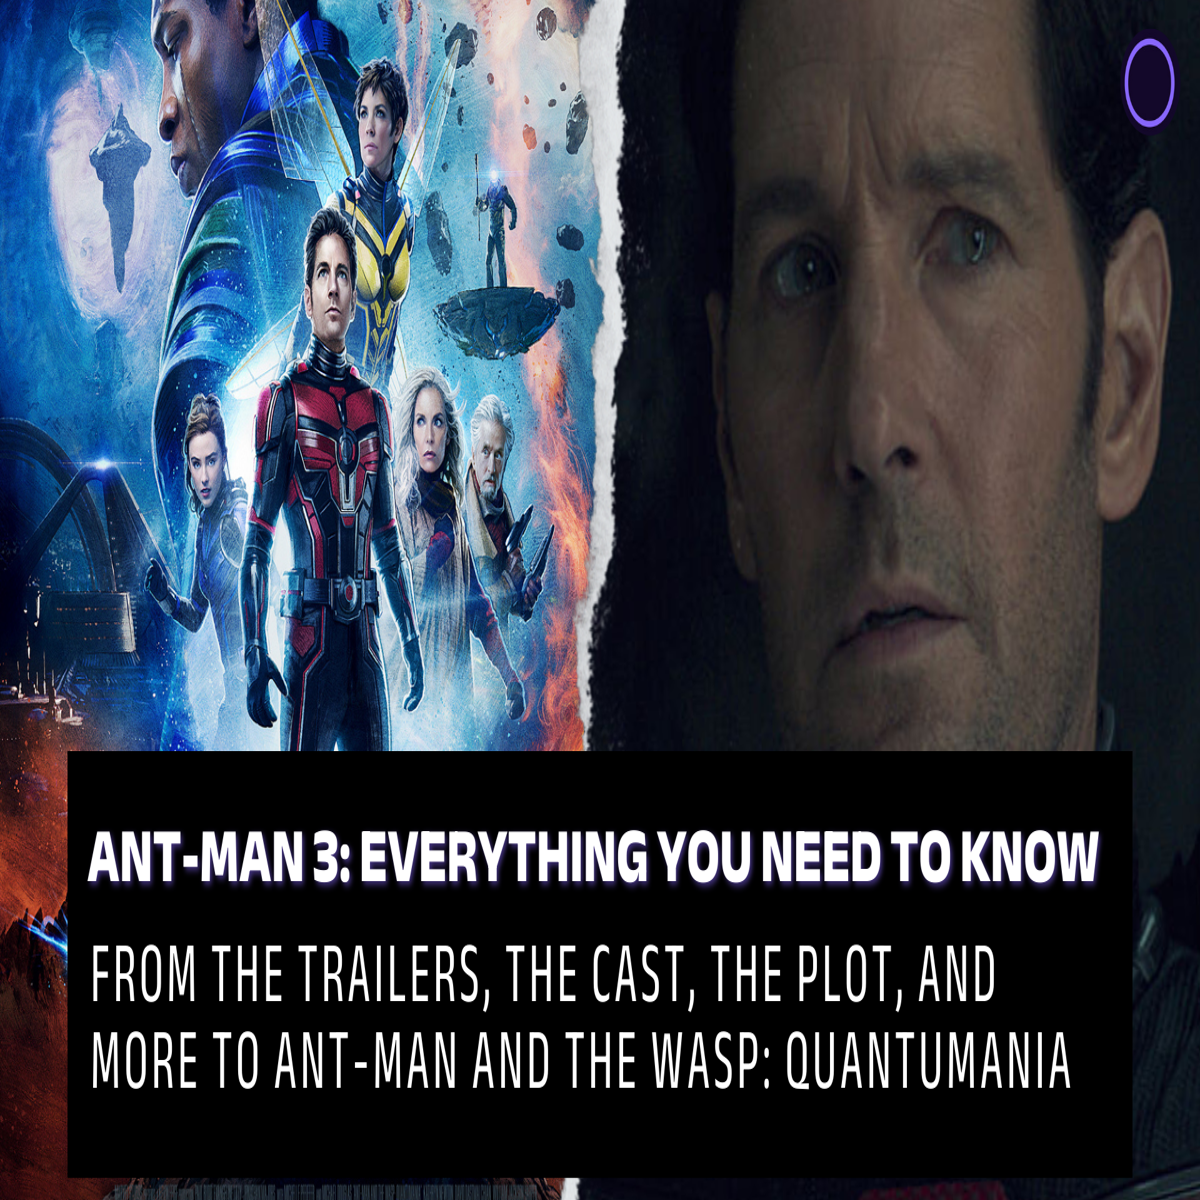 What are you thoughts on Ant man 1 and 2? Do you think Peyton Reed